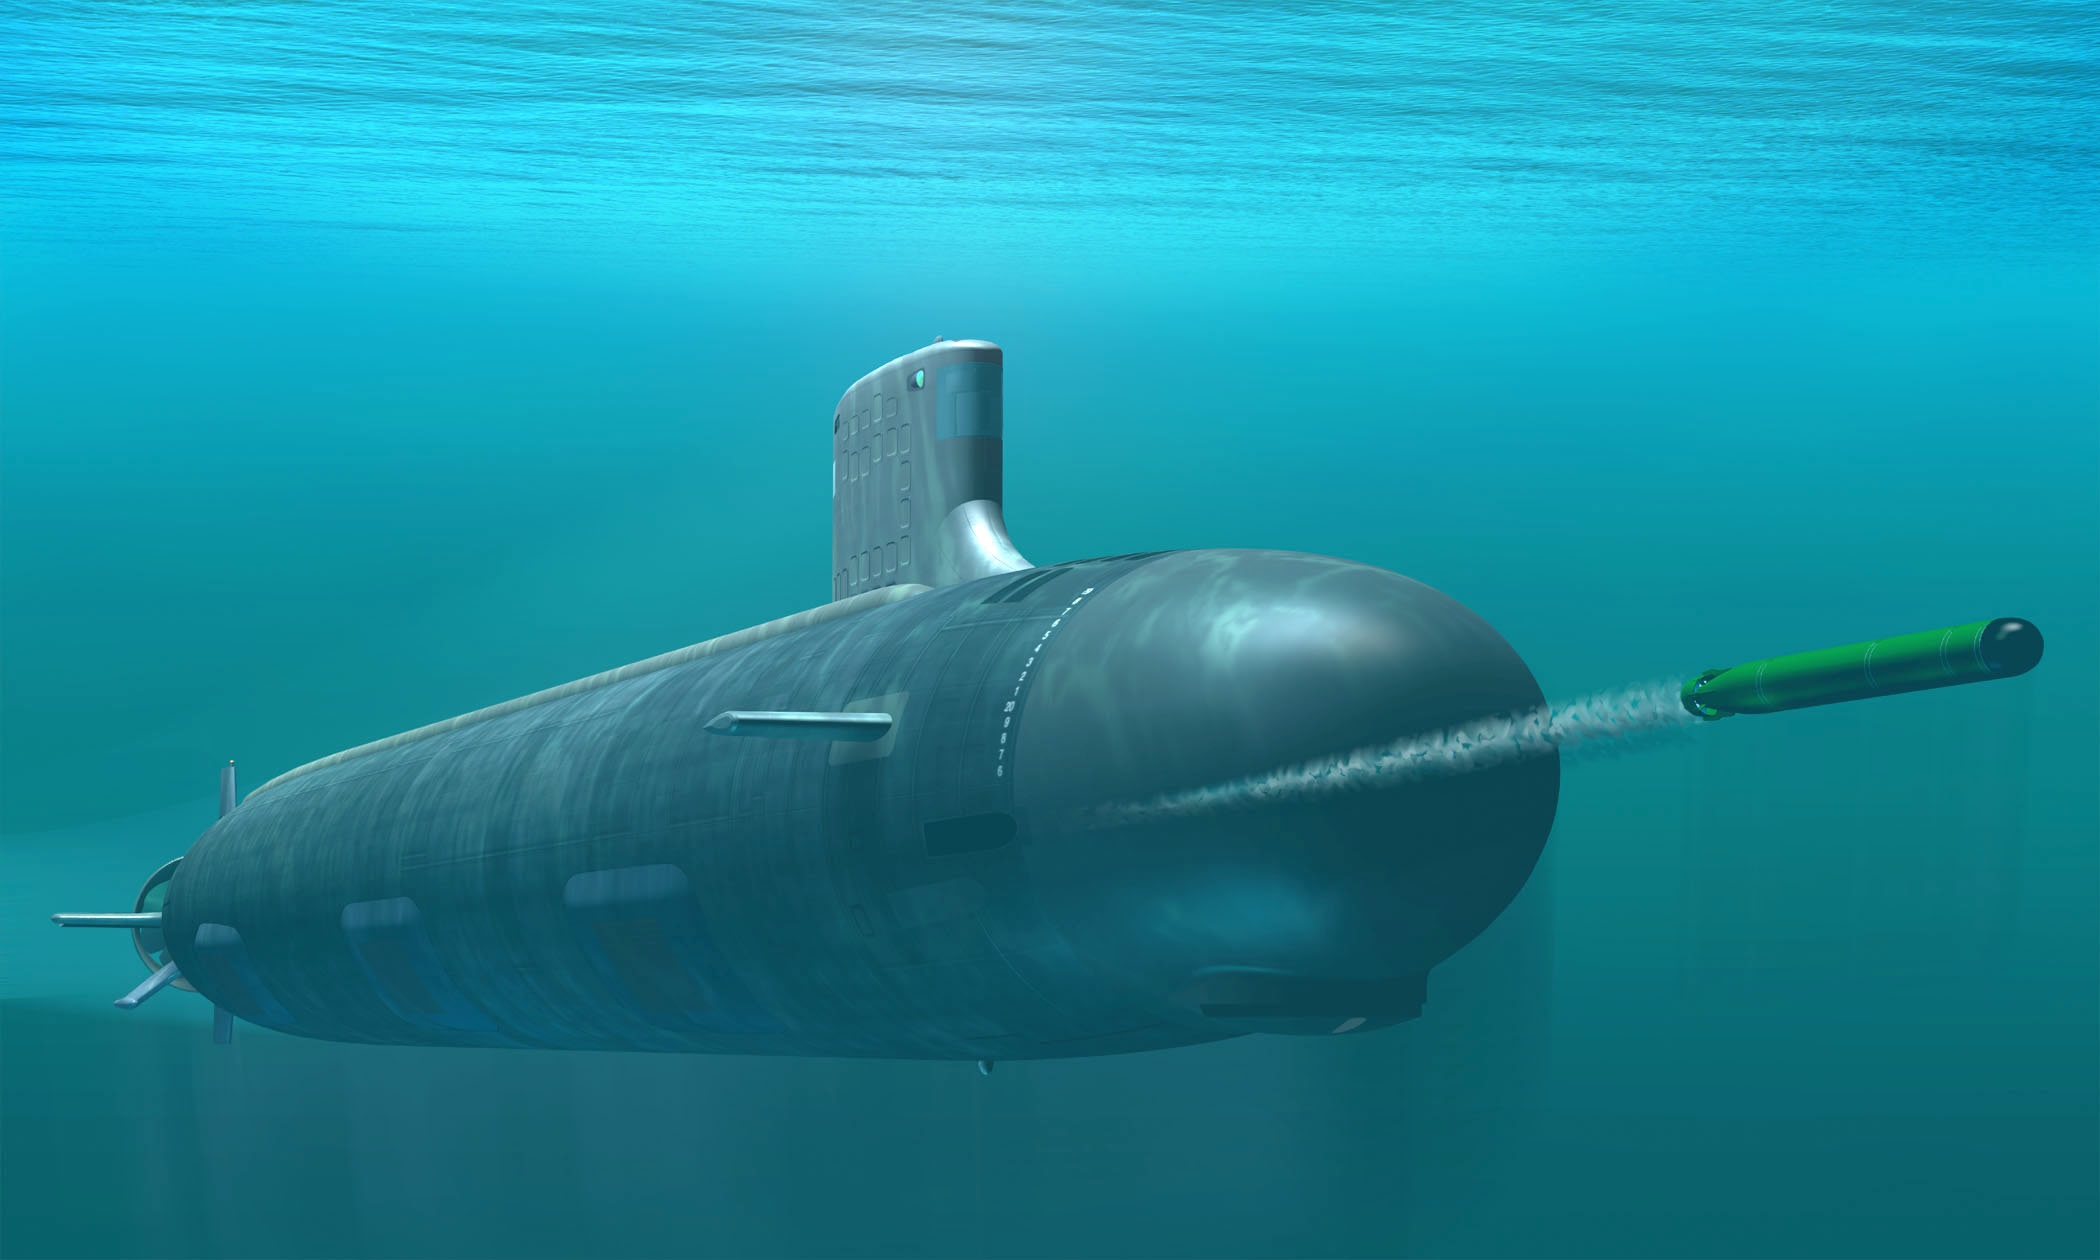 The Navy's Ultimate Fantasy: Underwater Submarine Bases to Fight Russia